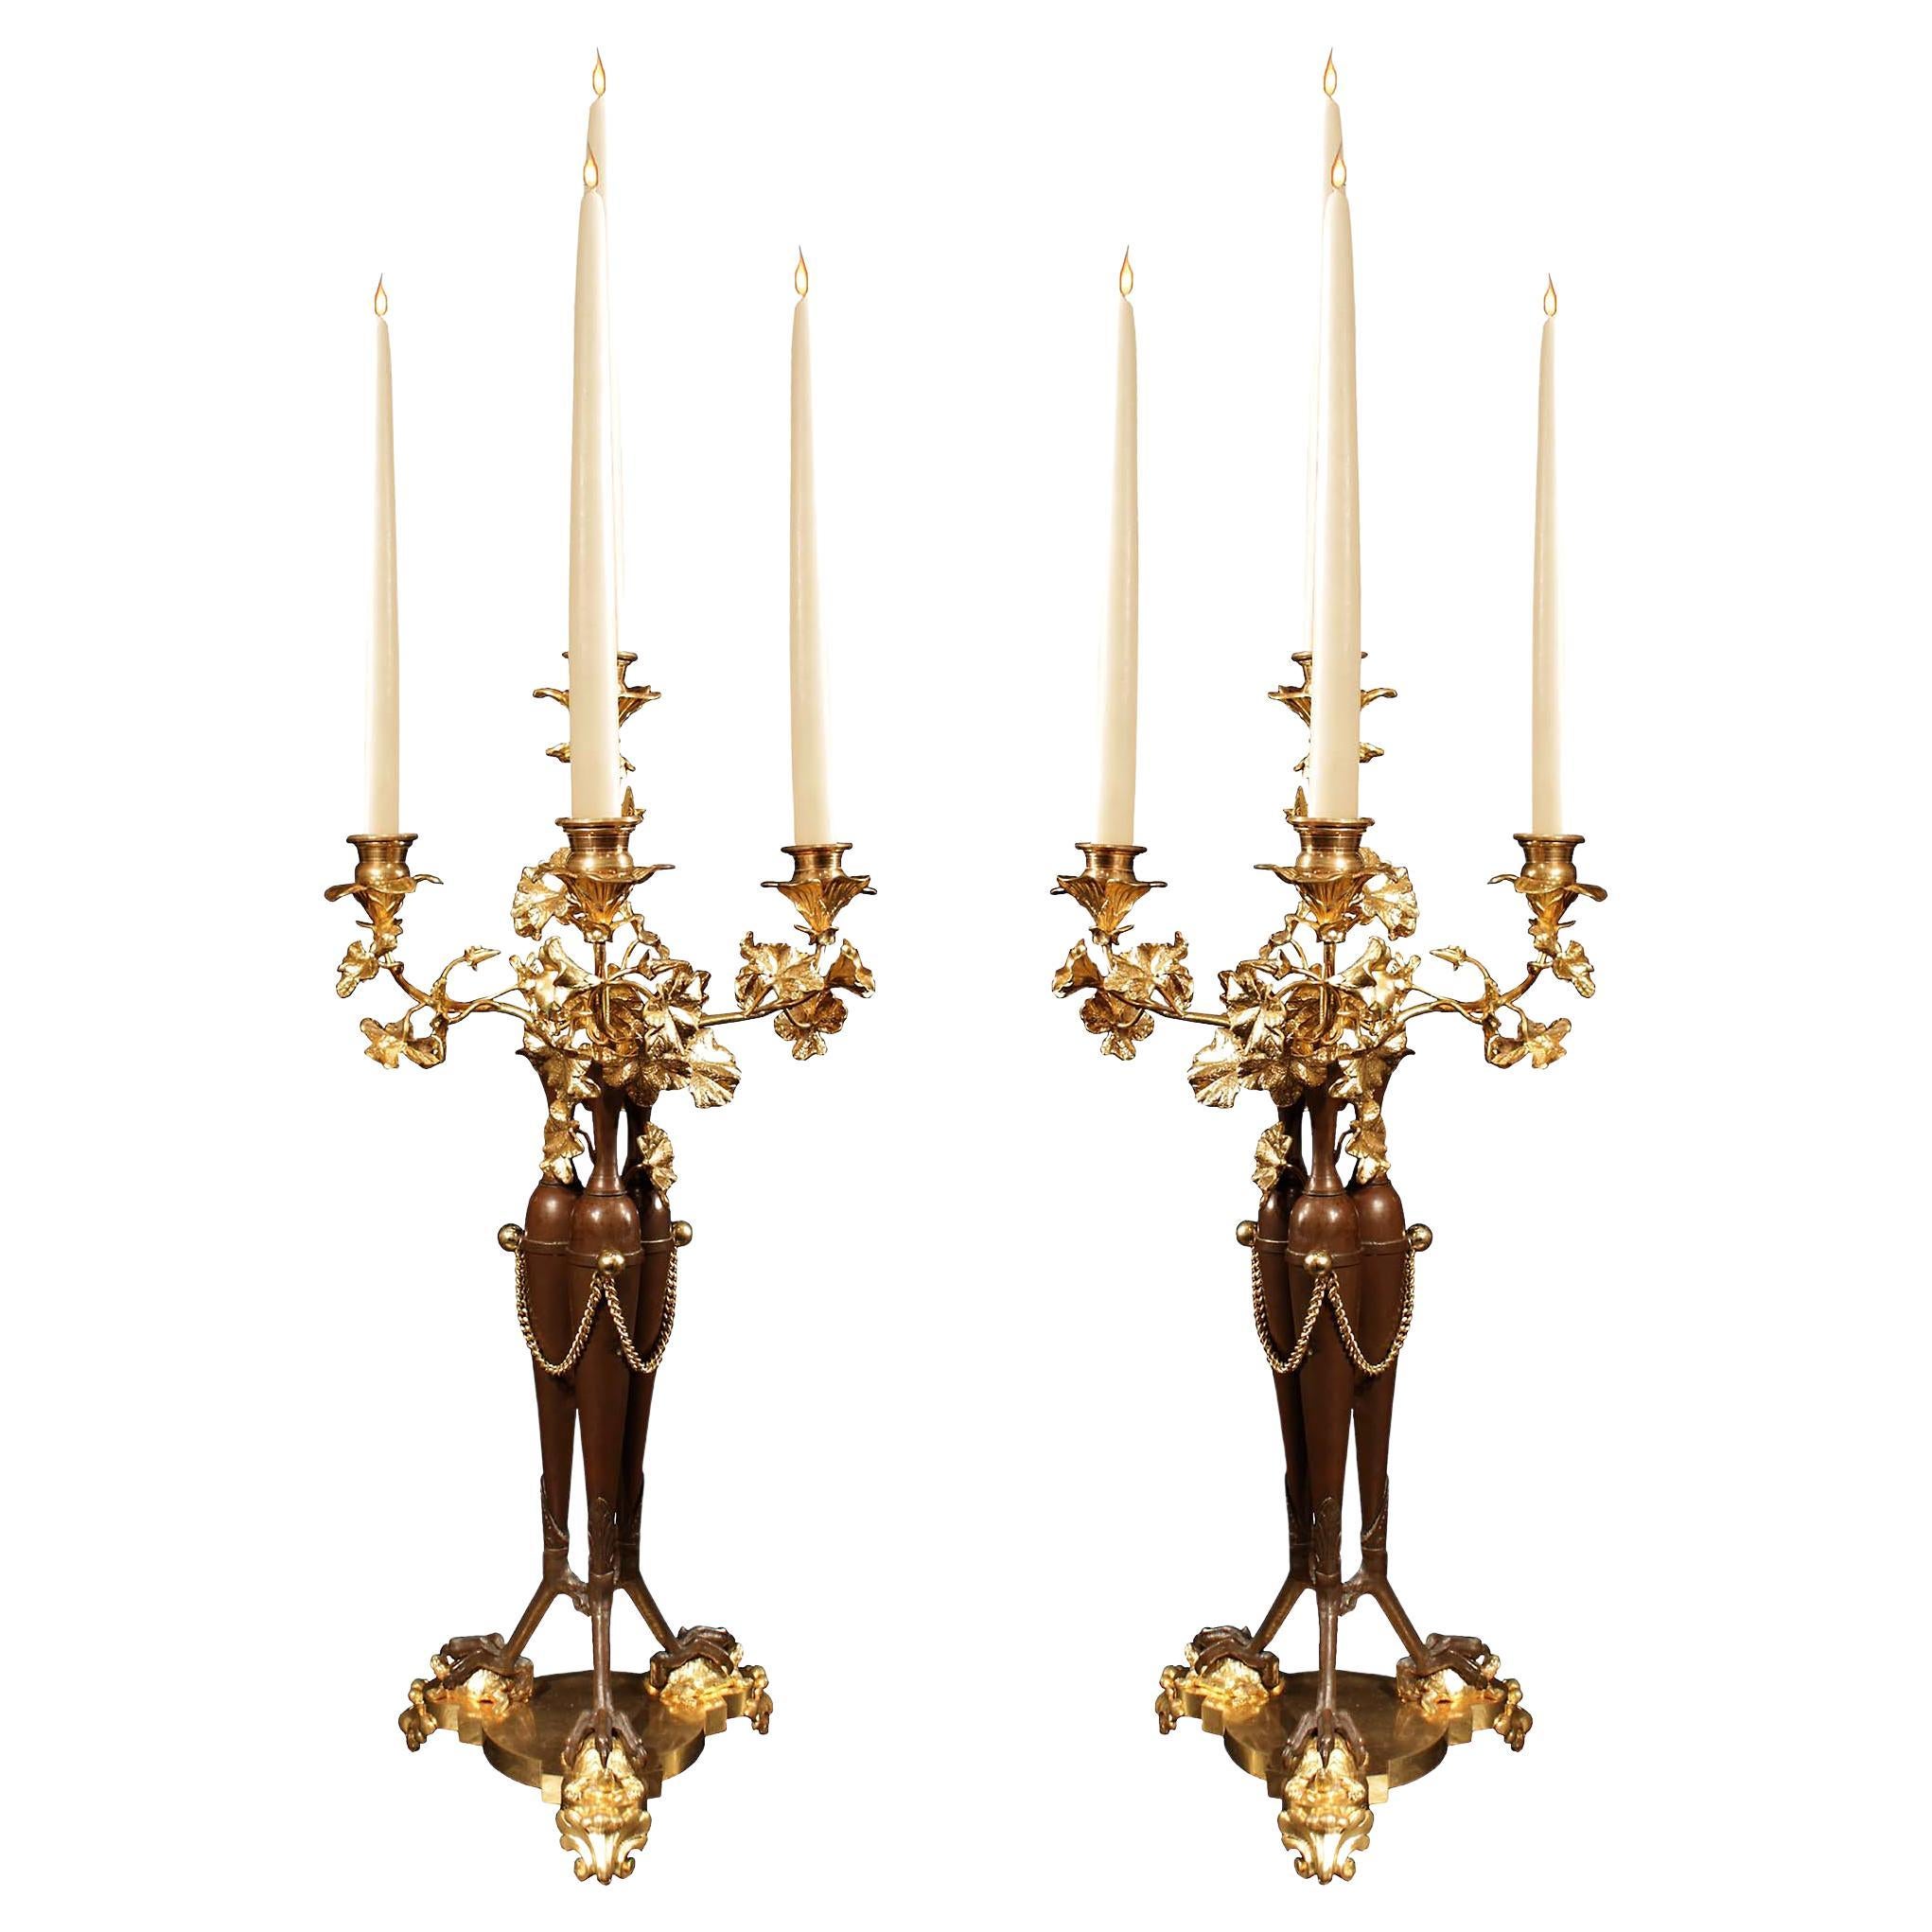 Pair of French 19th Century Neoclassical Style Bronze and Ormolu Candelabras